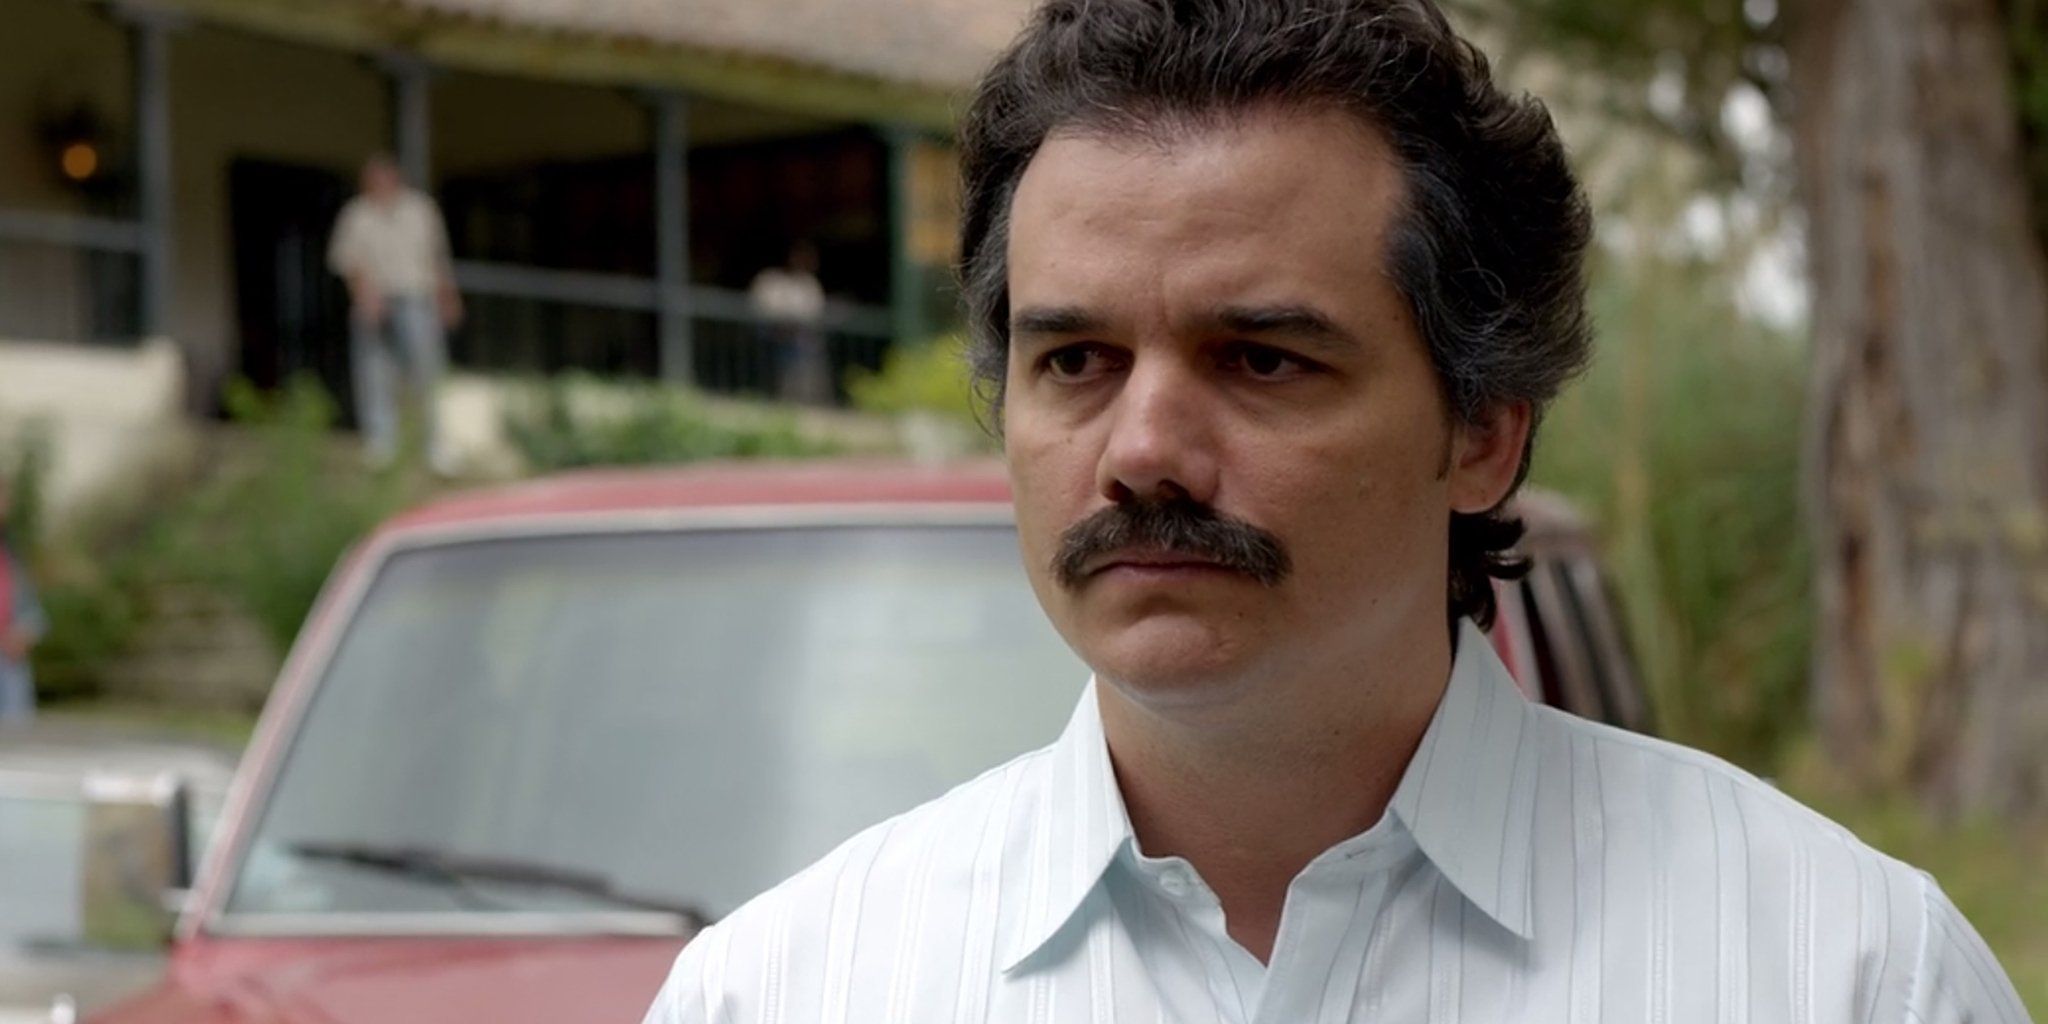 10 MyersBriggs® Personalities Of Narcos Characters